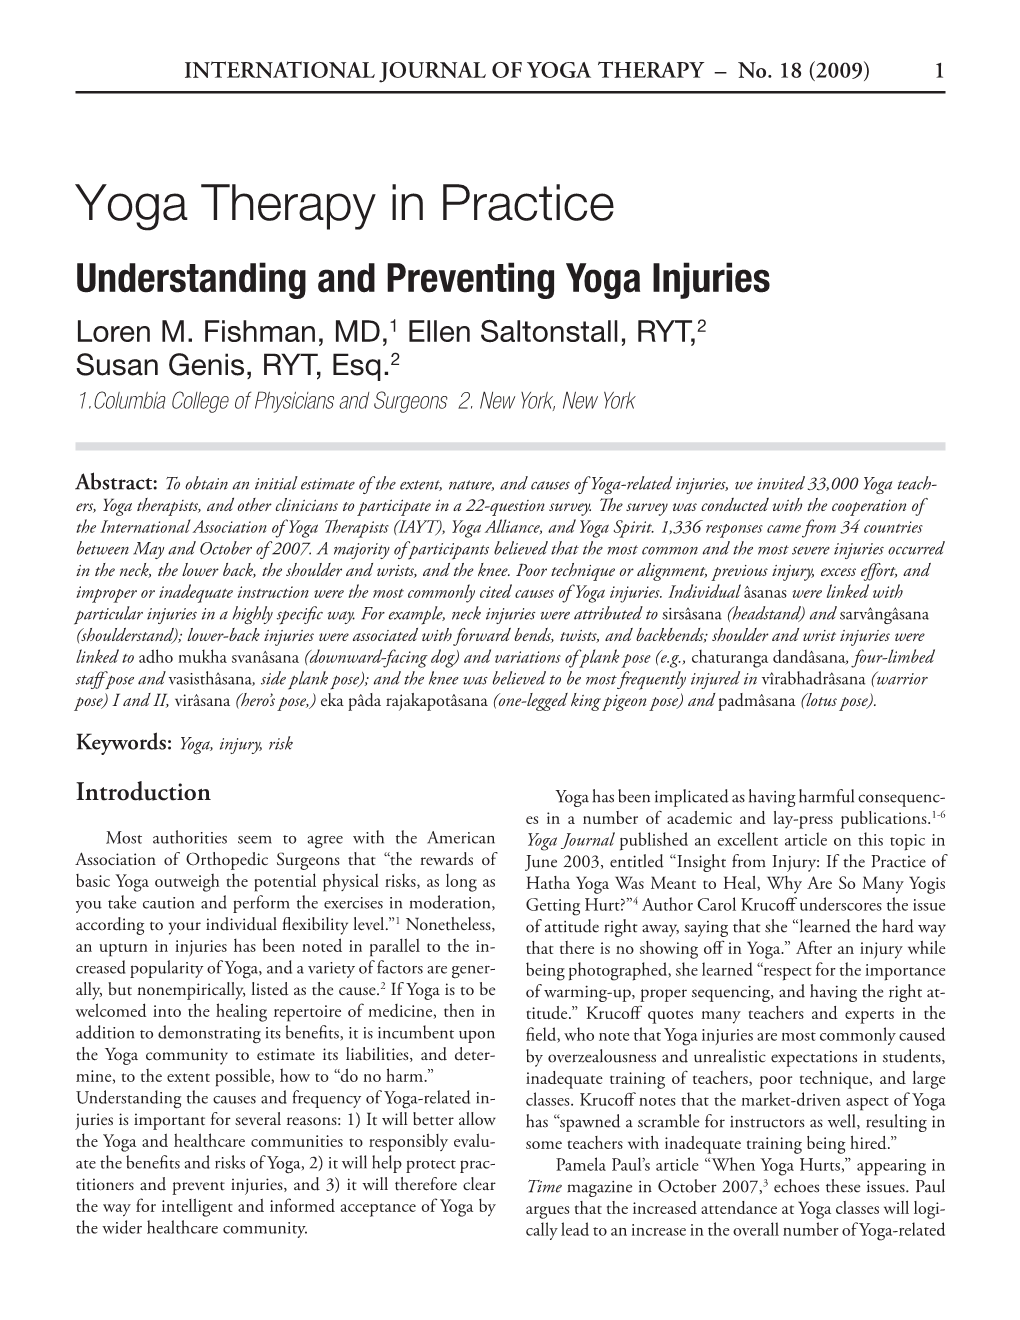 Yoga Therapy in Practice Understanding and Preventing Yoga Injuries Loren M